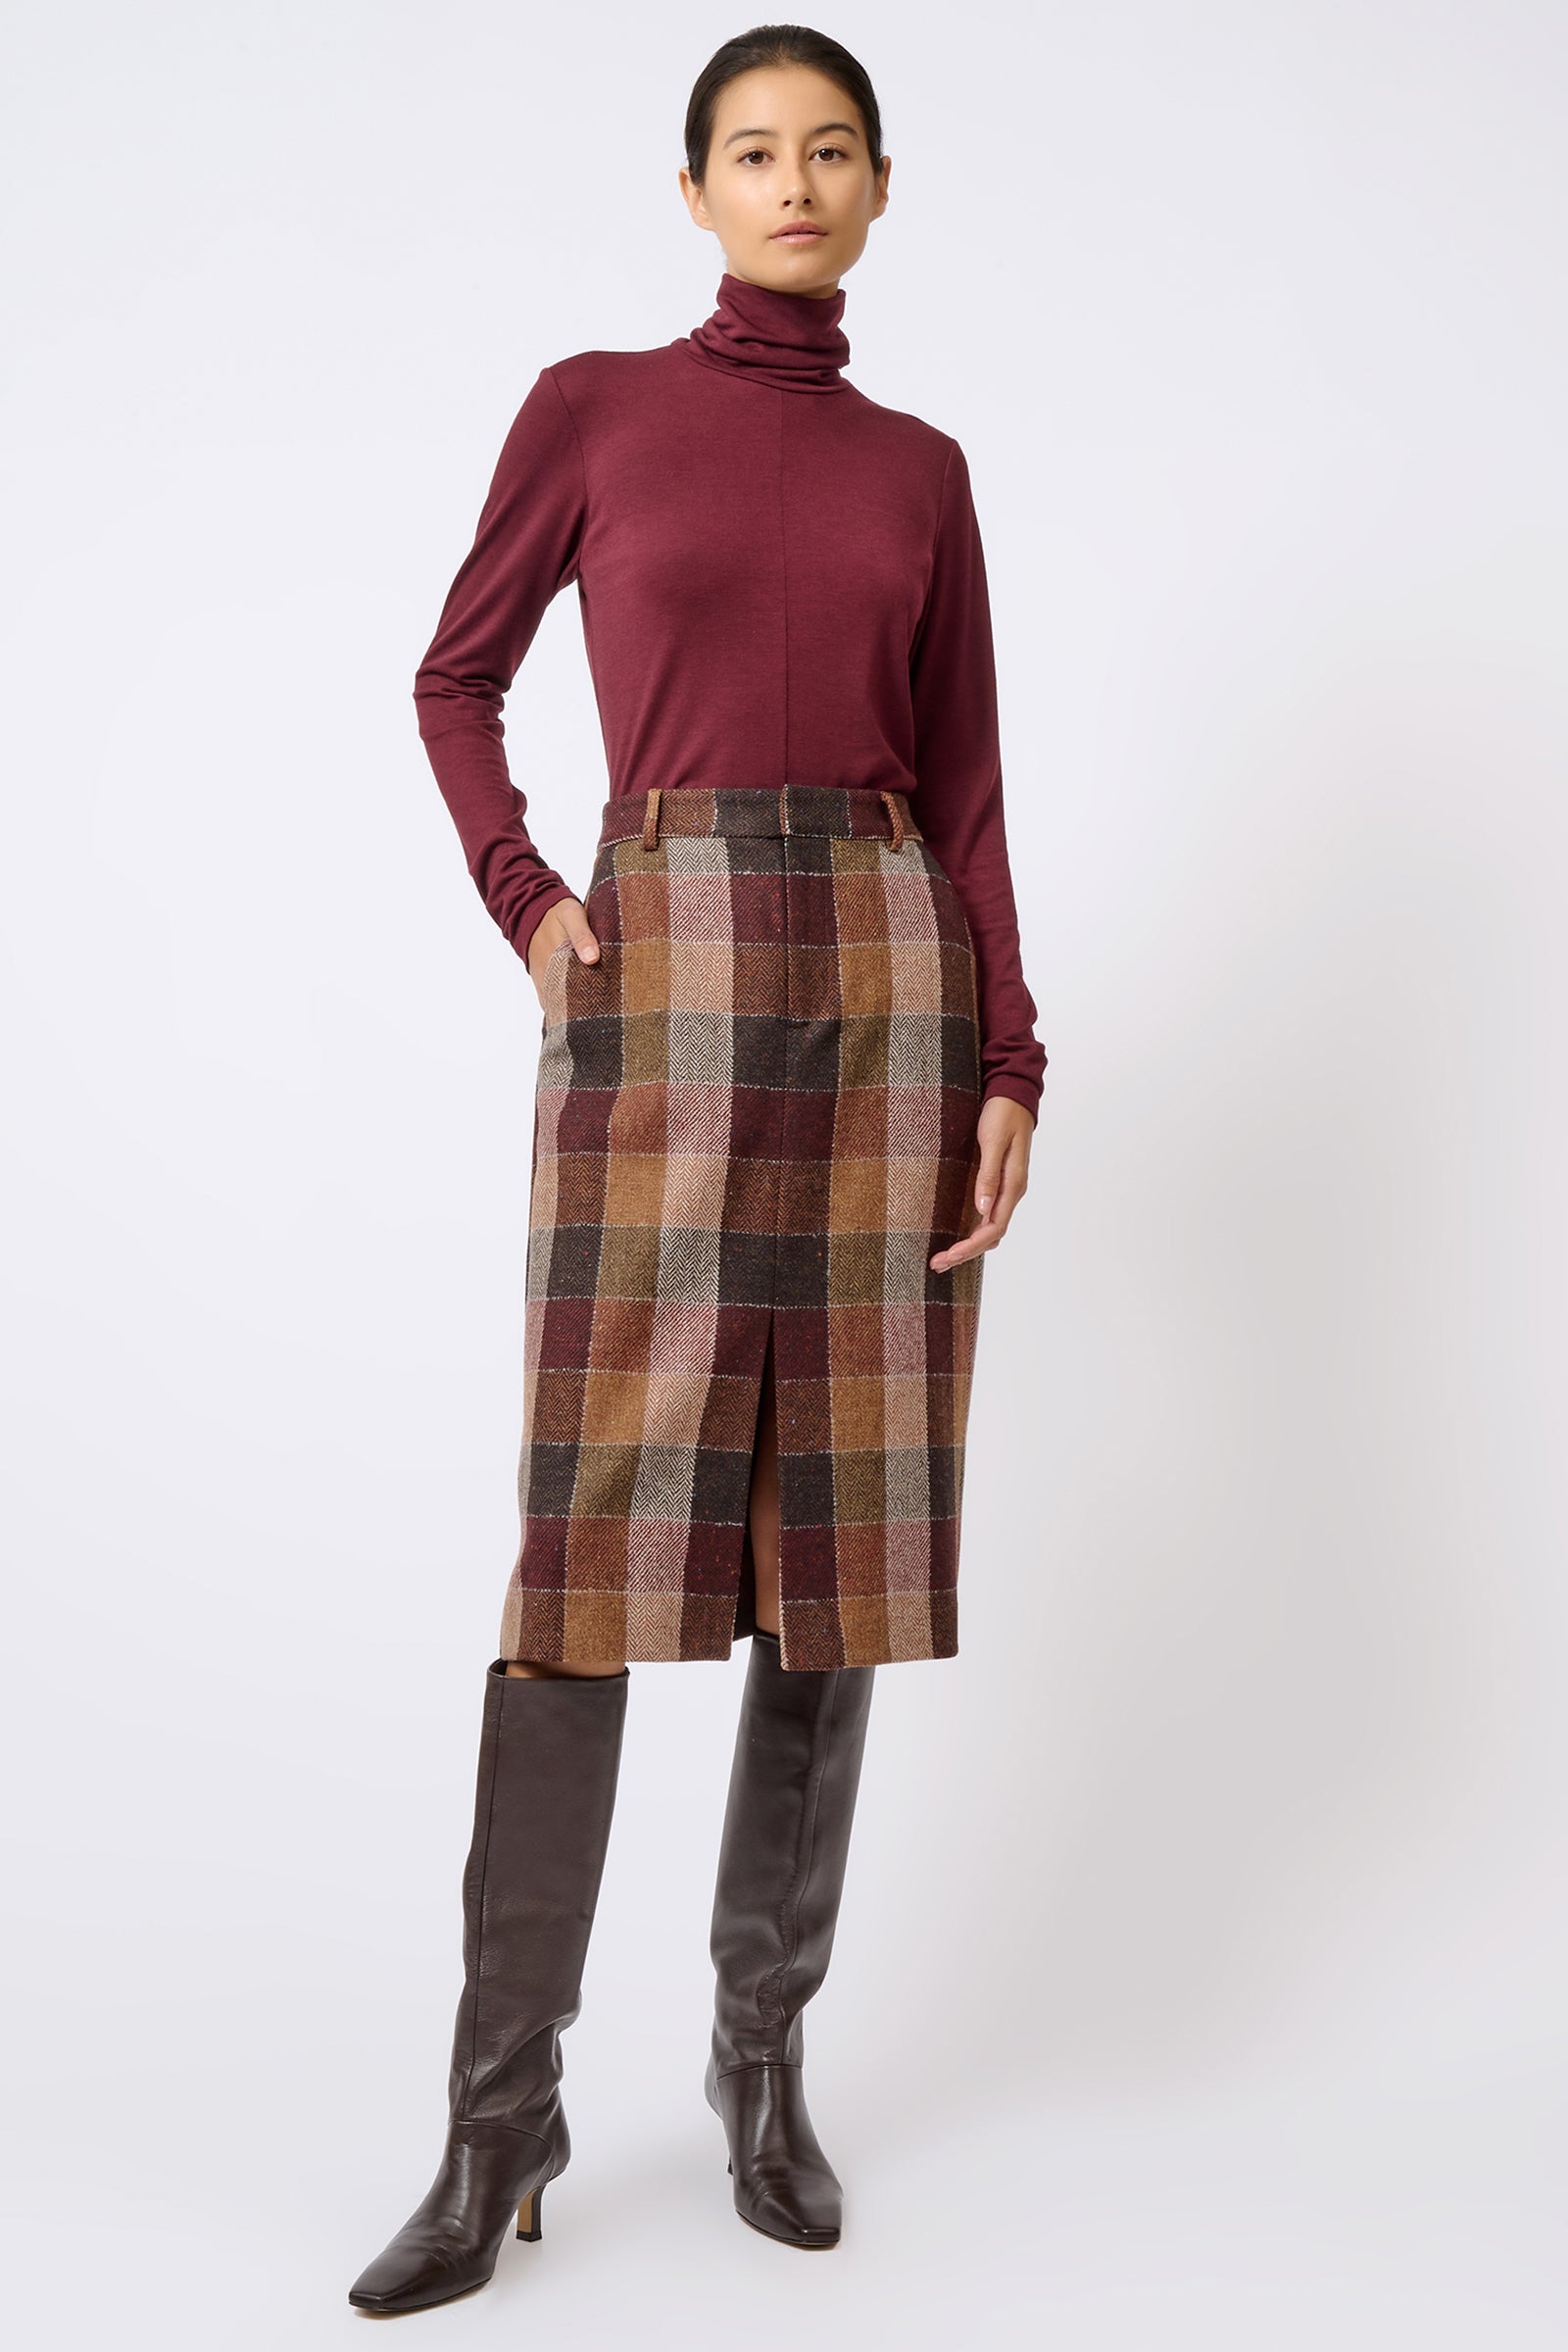 Kal Rieman Caroline Trouser Skirt in Patchwork Fabric on Model with Hand in Pocket Full Front View